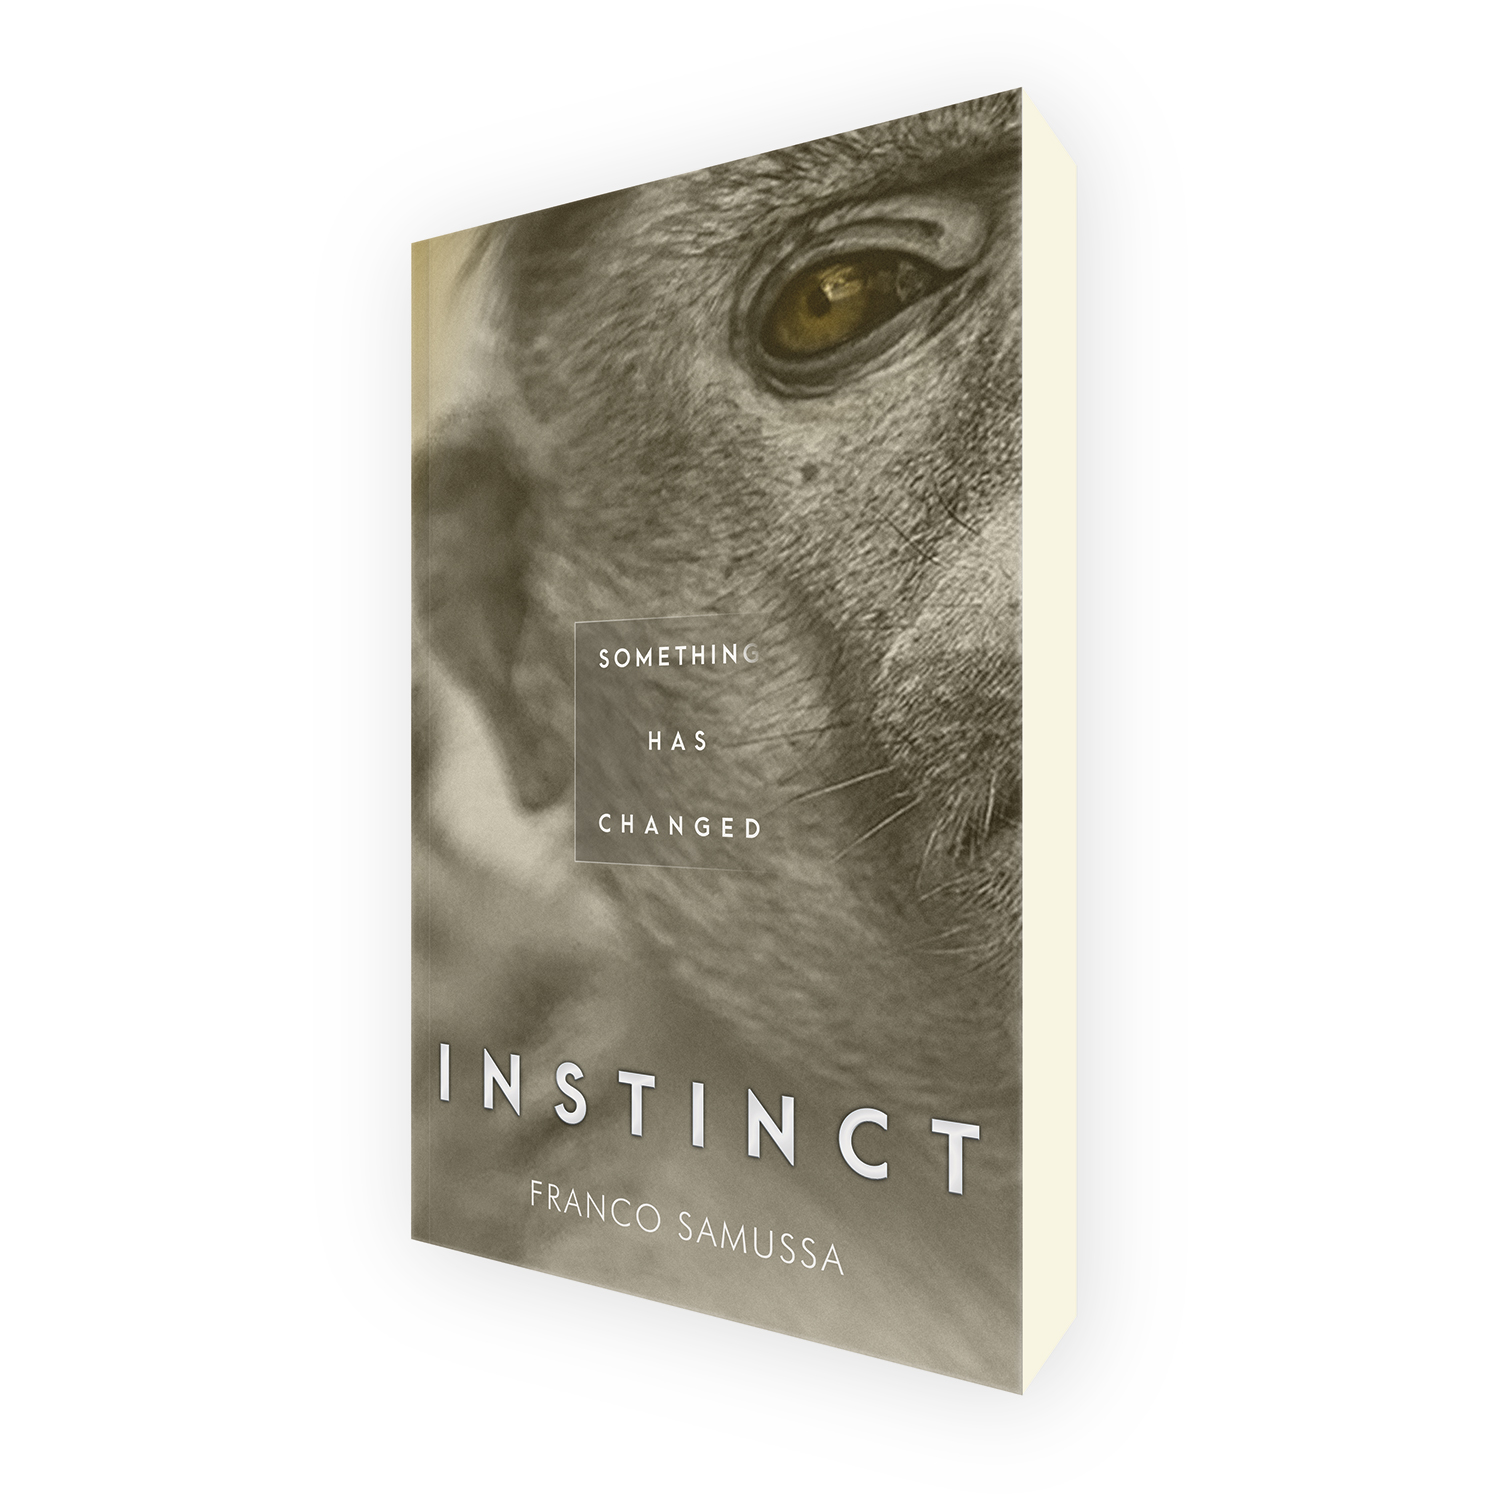 'Instinct' is a bespoke cover design for a modern eco-thriller novel. The book cover was designed by Mark Thomas, of coverness.com. To find out more about my book design services, please visit www.coverness.com.